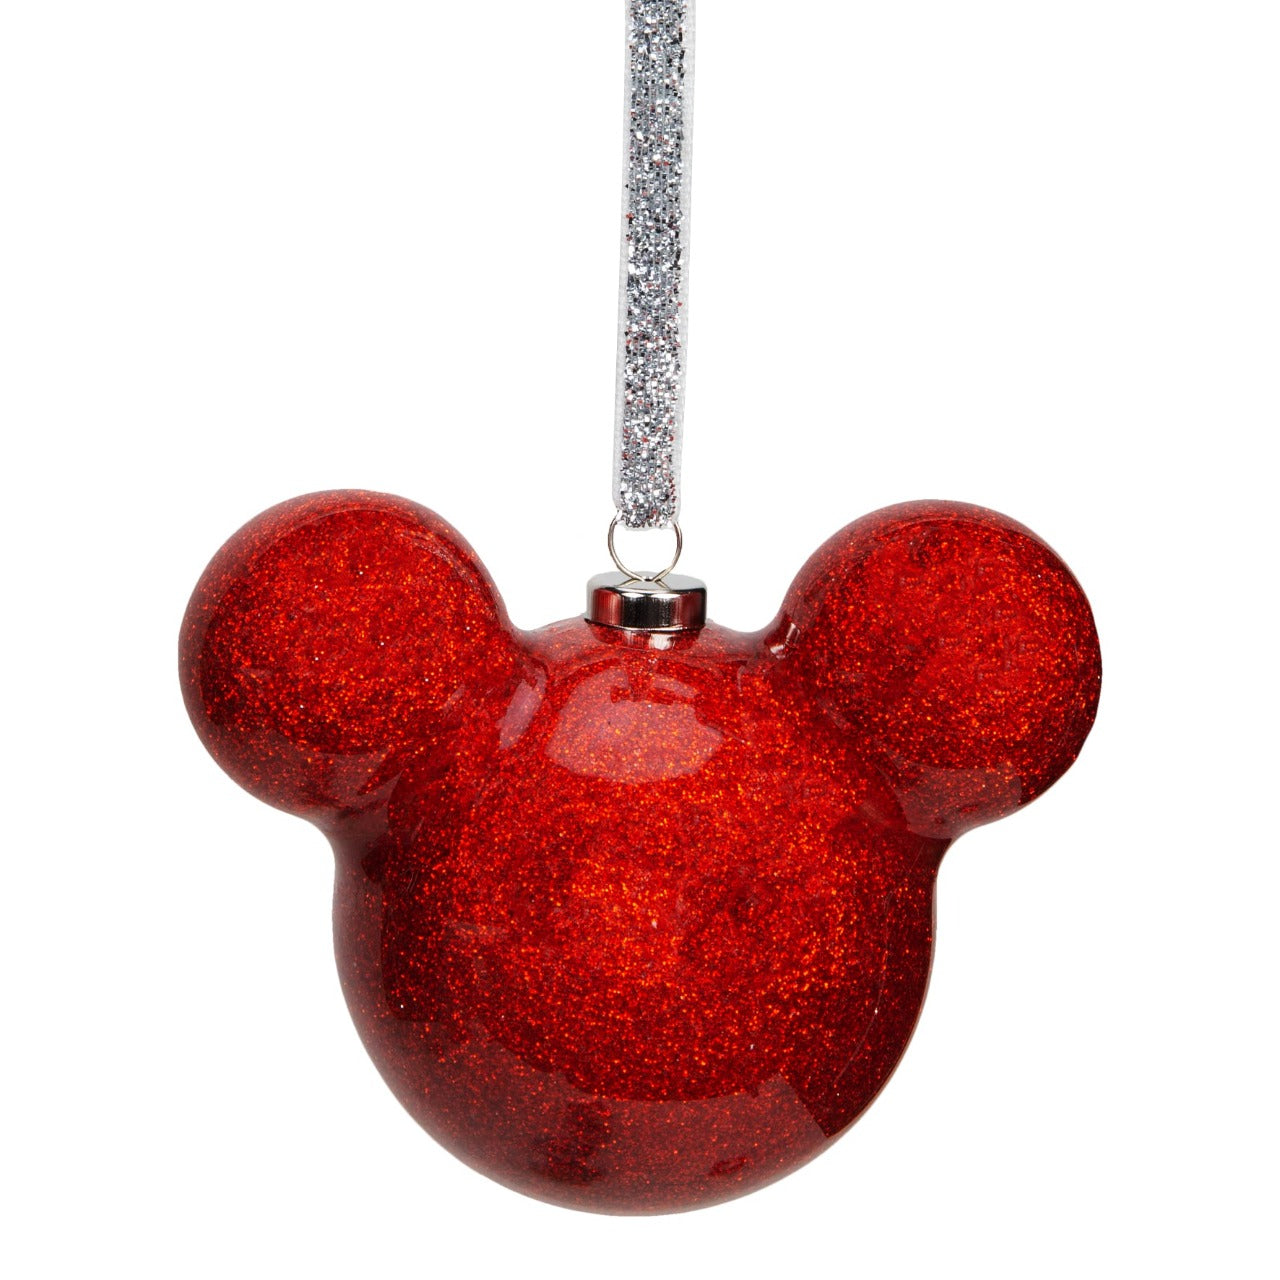 Disney Mickey Mouse Red Glitter Christmas Bauble 6 cm  Bring some of Disney's magic to the festivity with this wonderful 6cm red glitter Mickey Mouse bauble.